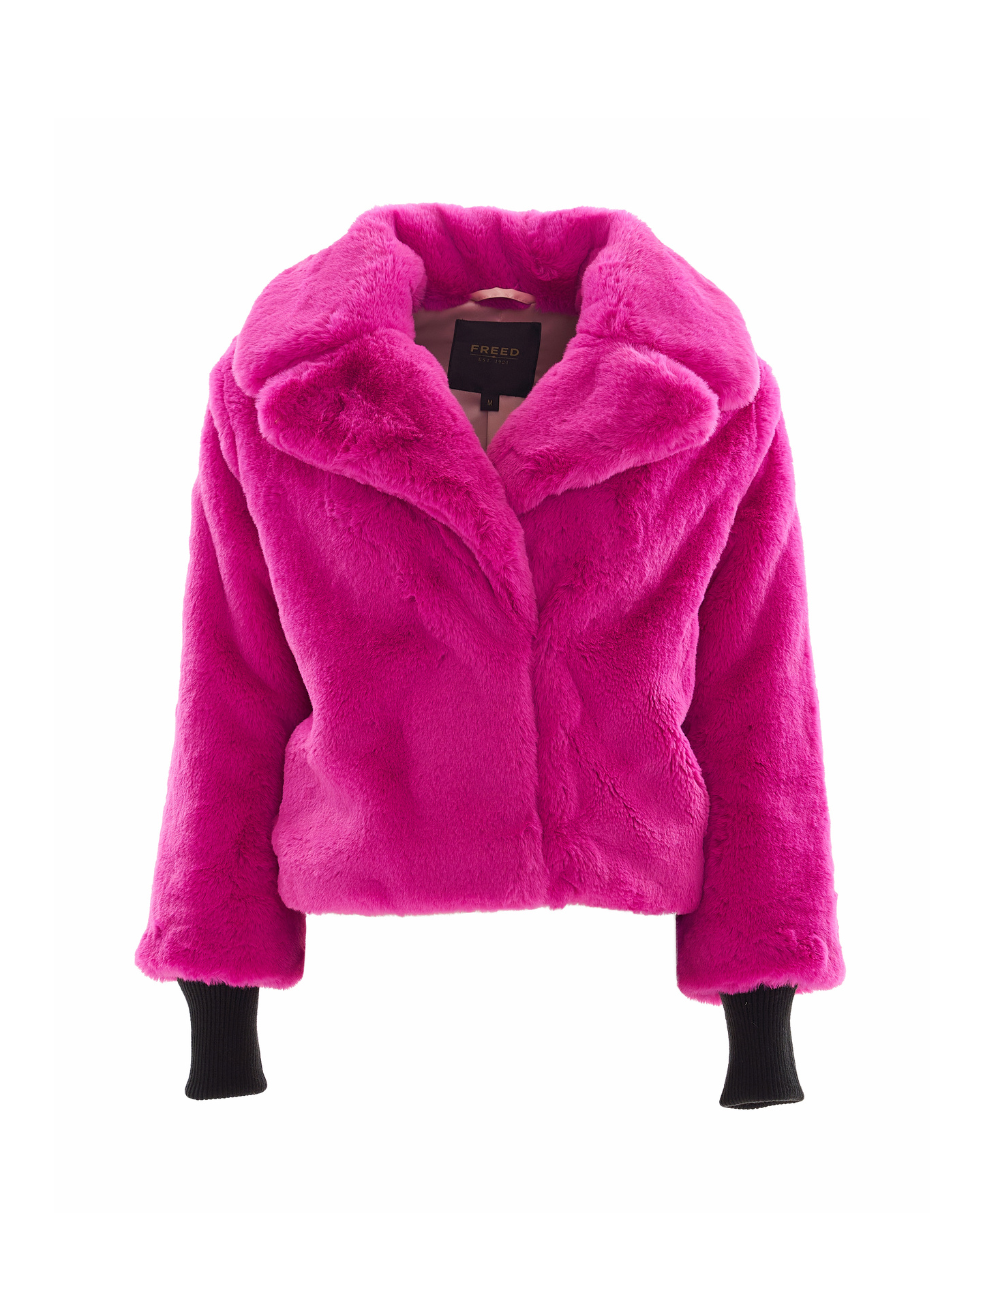 Sawyer Candy Slow Fashion Repurposed Upcycled Cropped Faux Fur Jacket Made in Canada Bomber Bright Pink